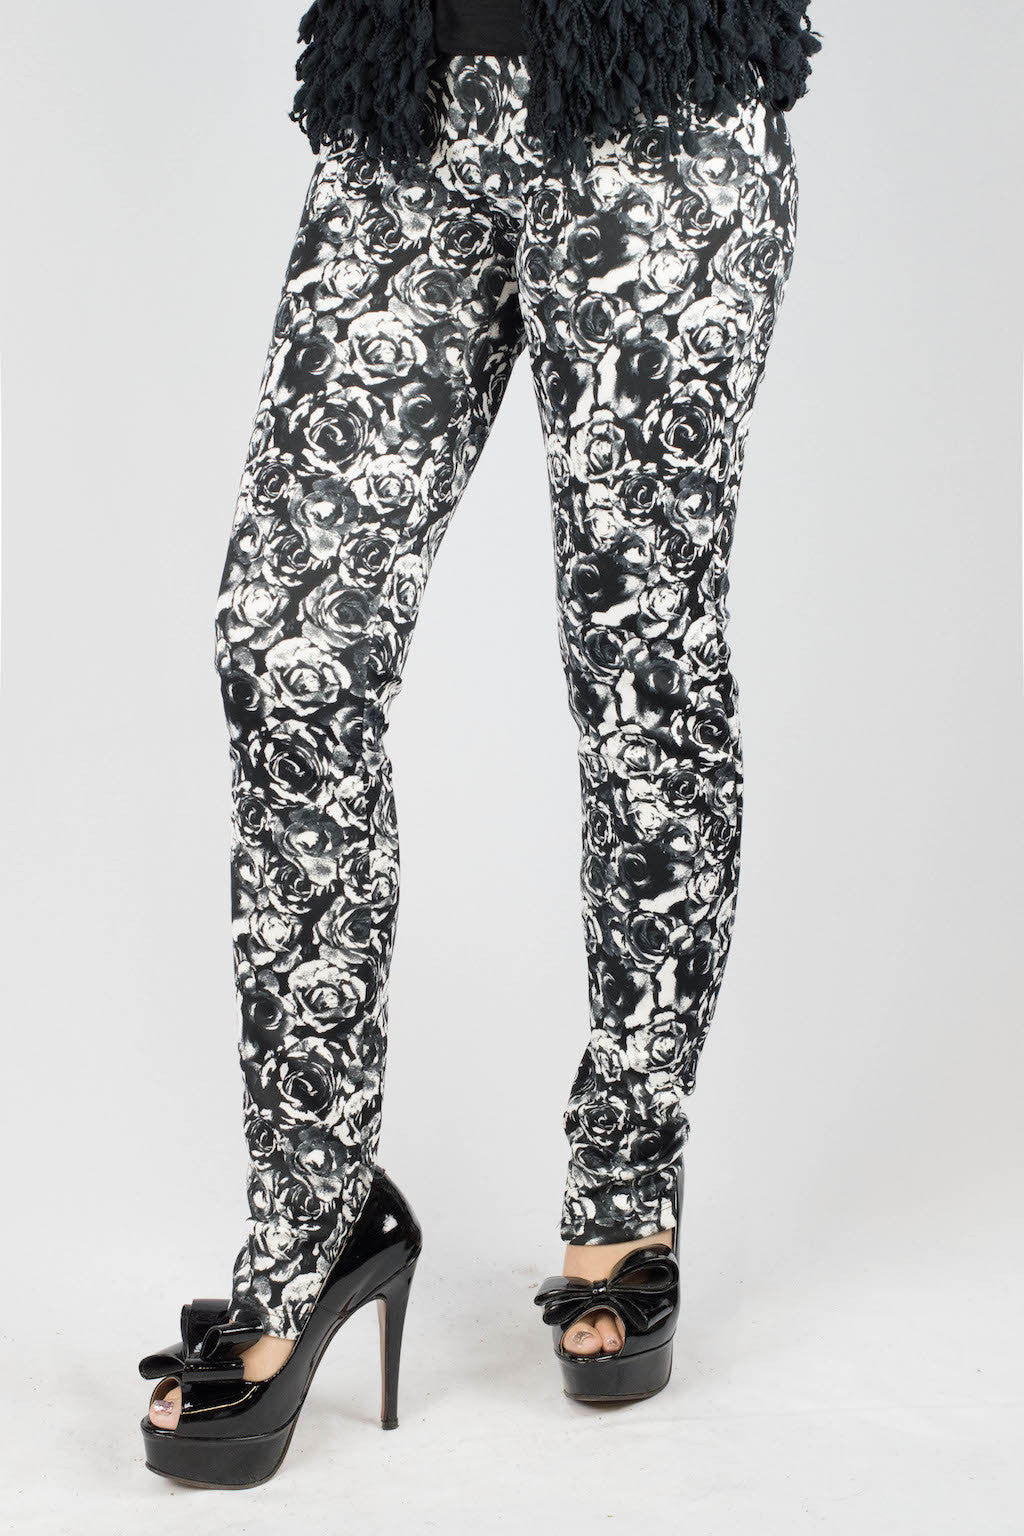 Isabella Floral Fitted Scuba Pants - ANA MARIA KIM
 - 4